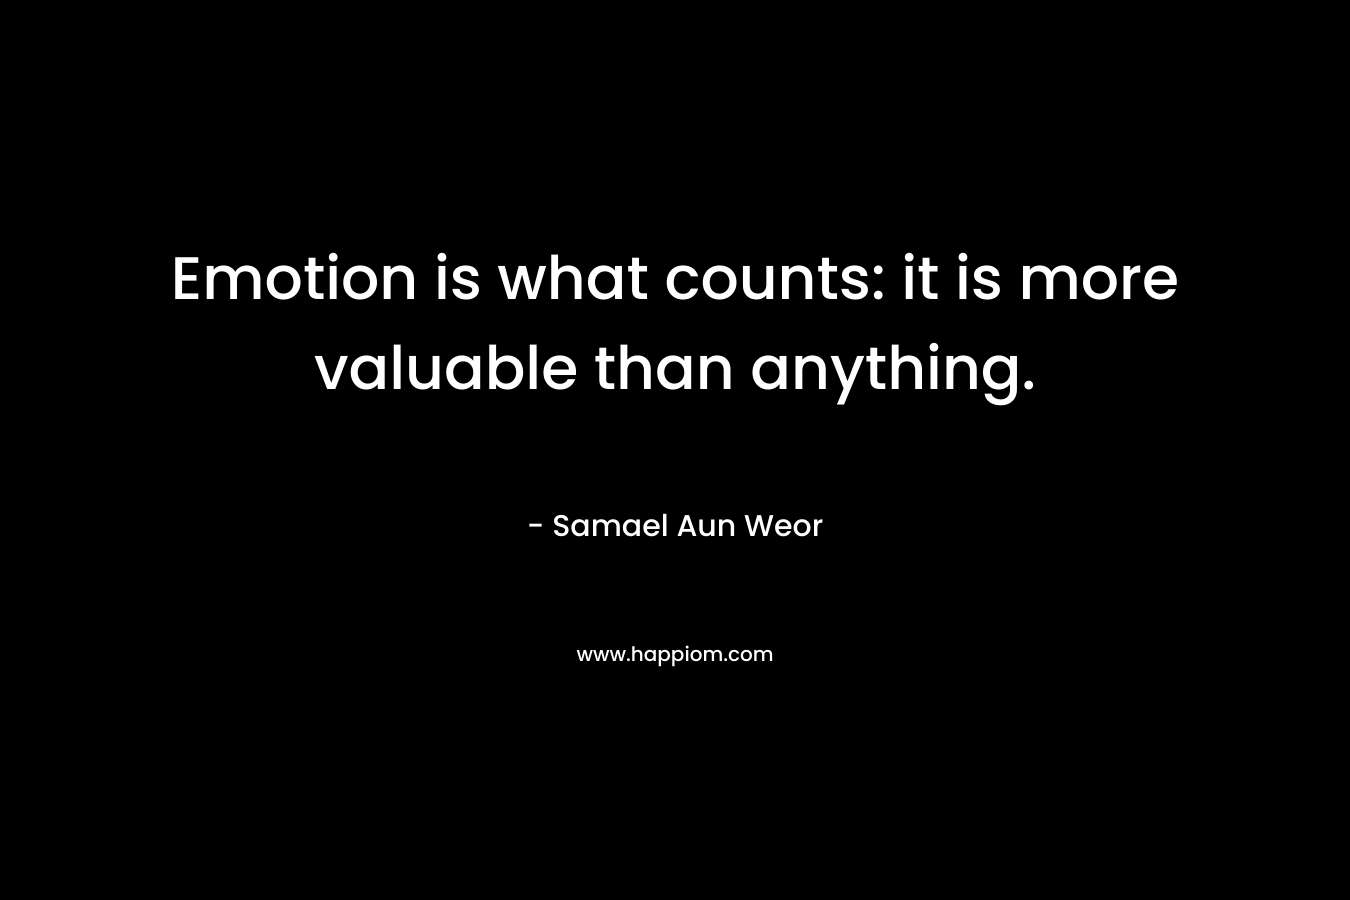 Emotion is what counts: it is more valuable than anything. – Samael Aun Weor